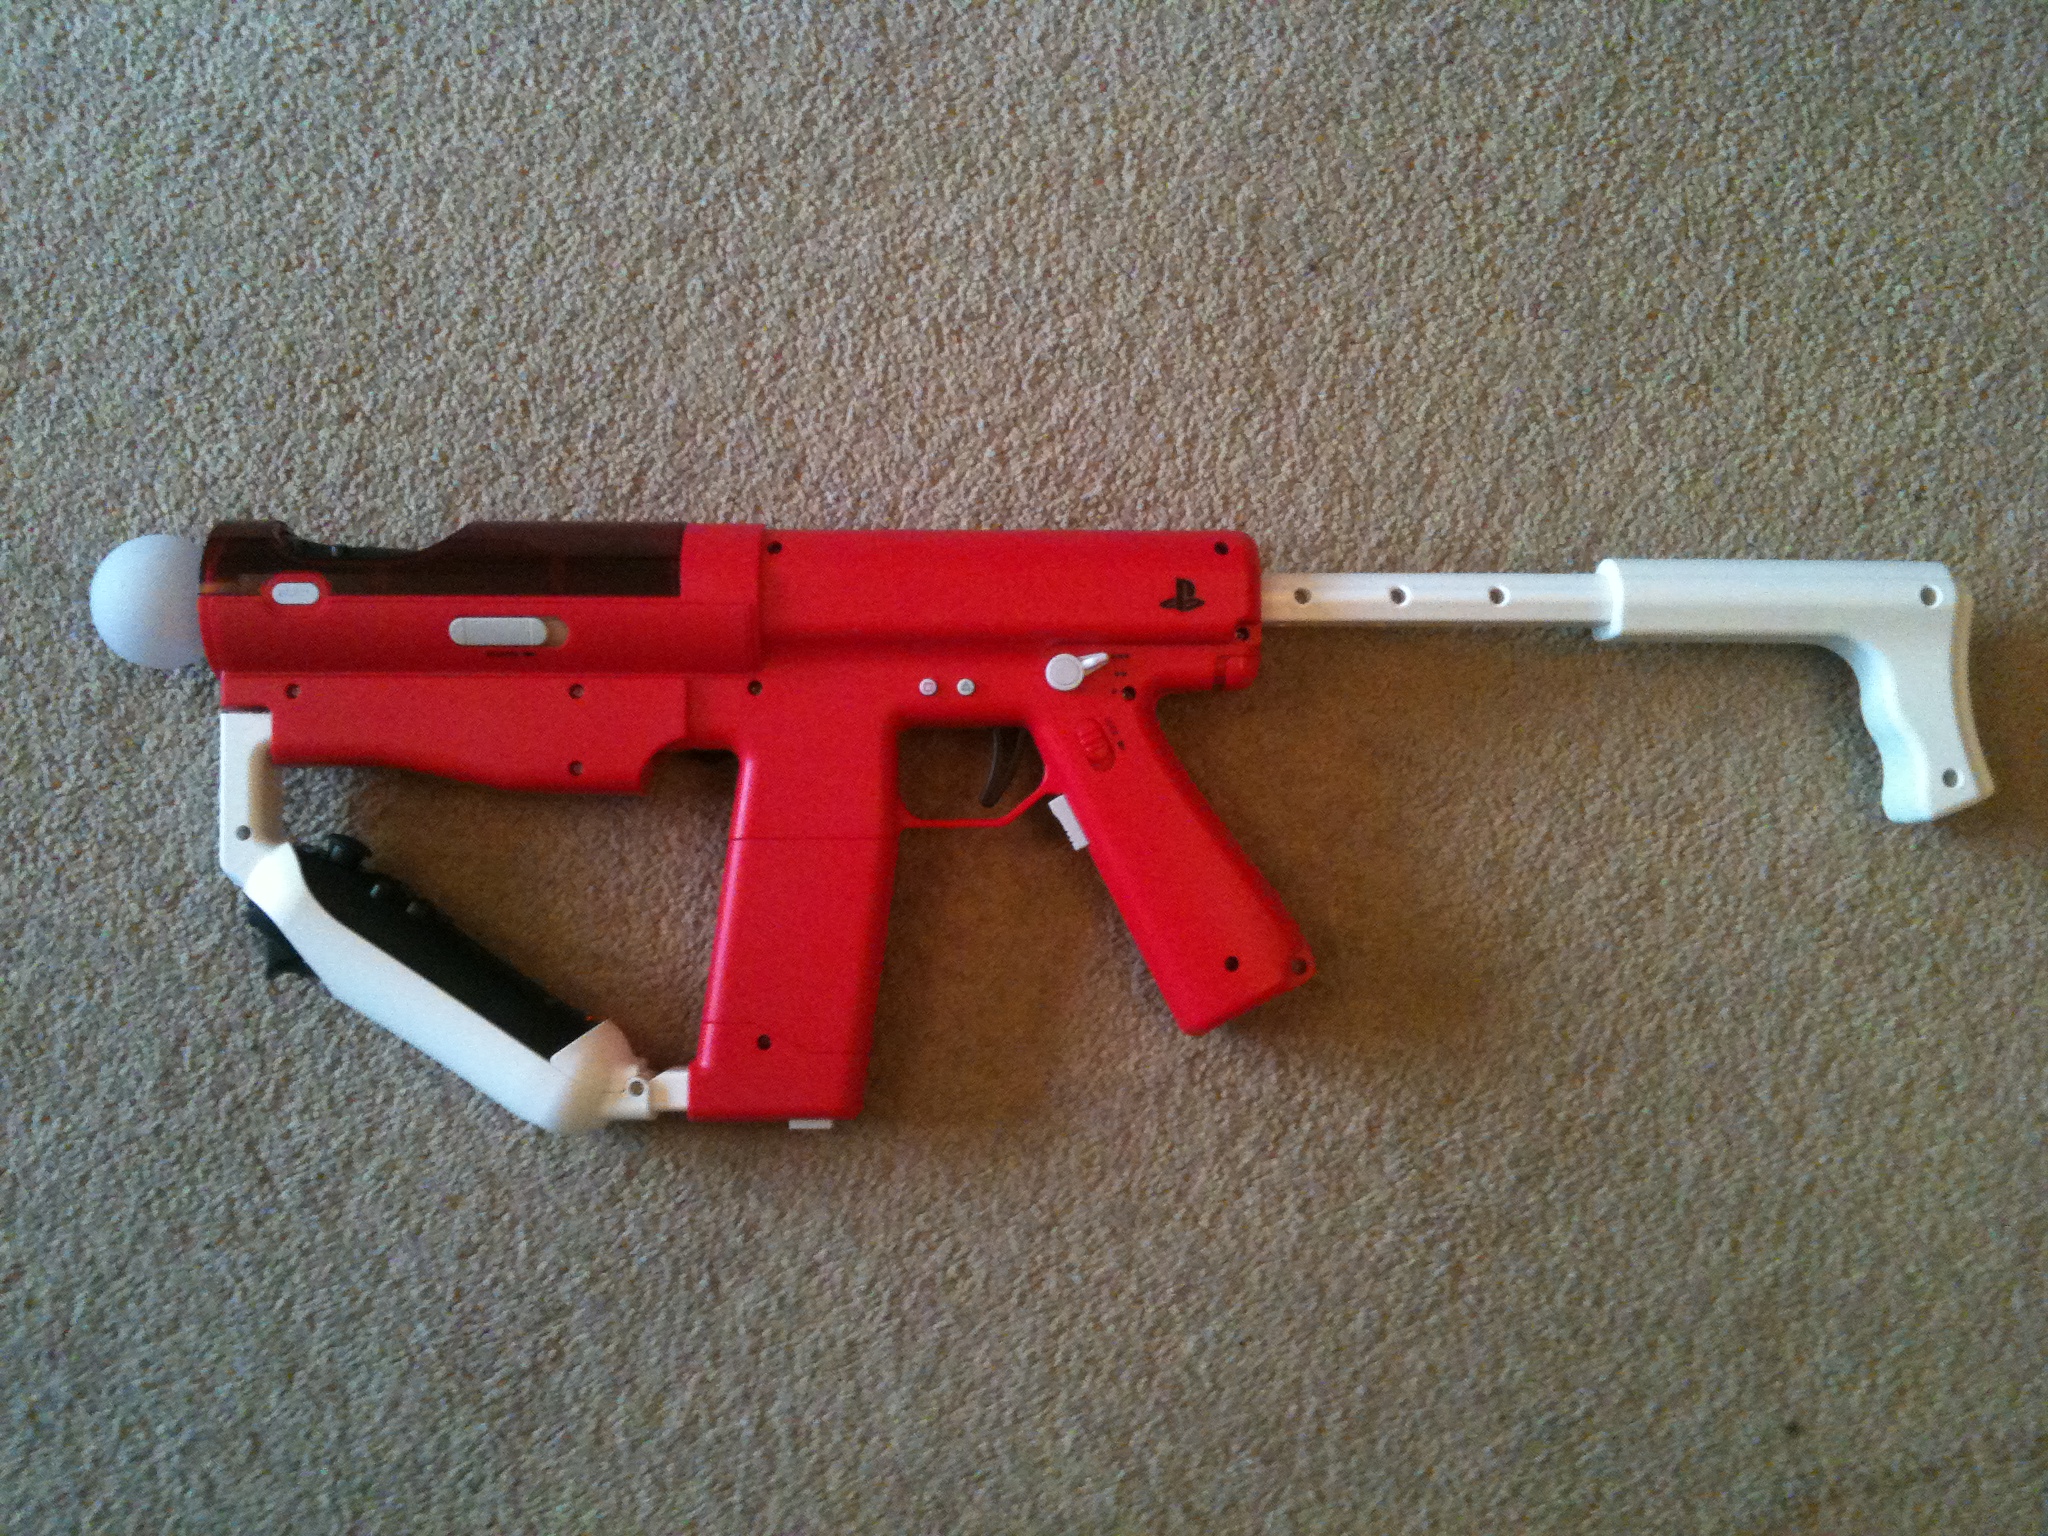 a red plastic toy gun laying on the floor